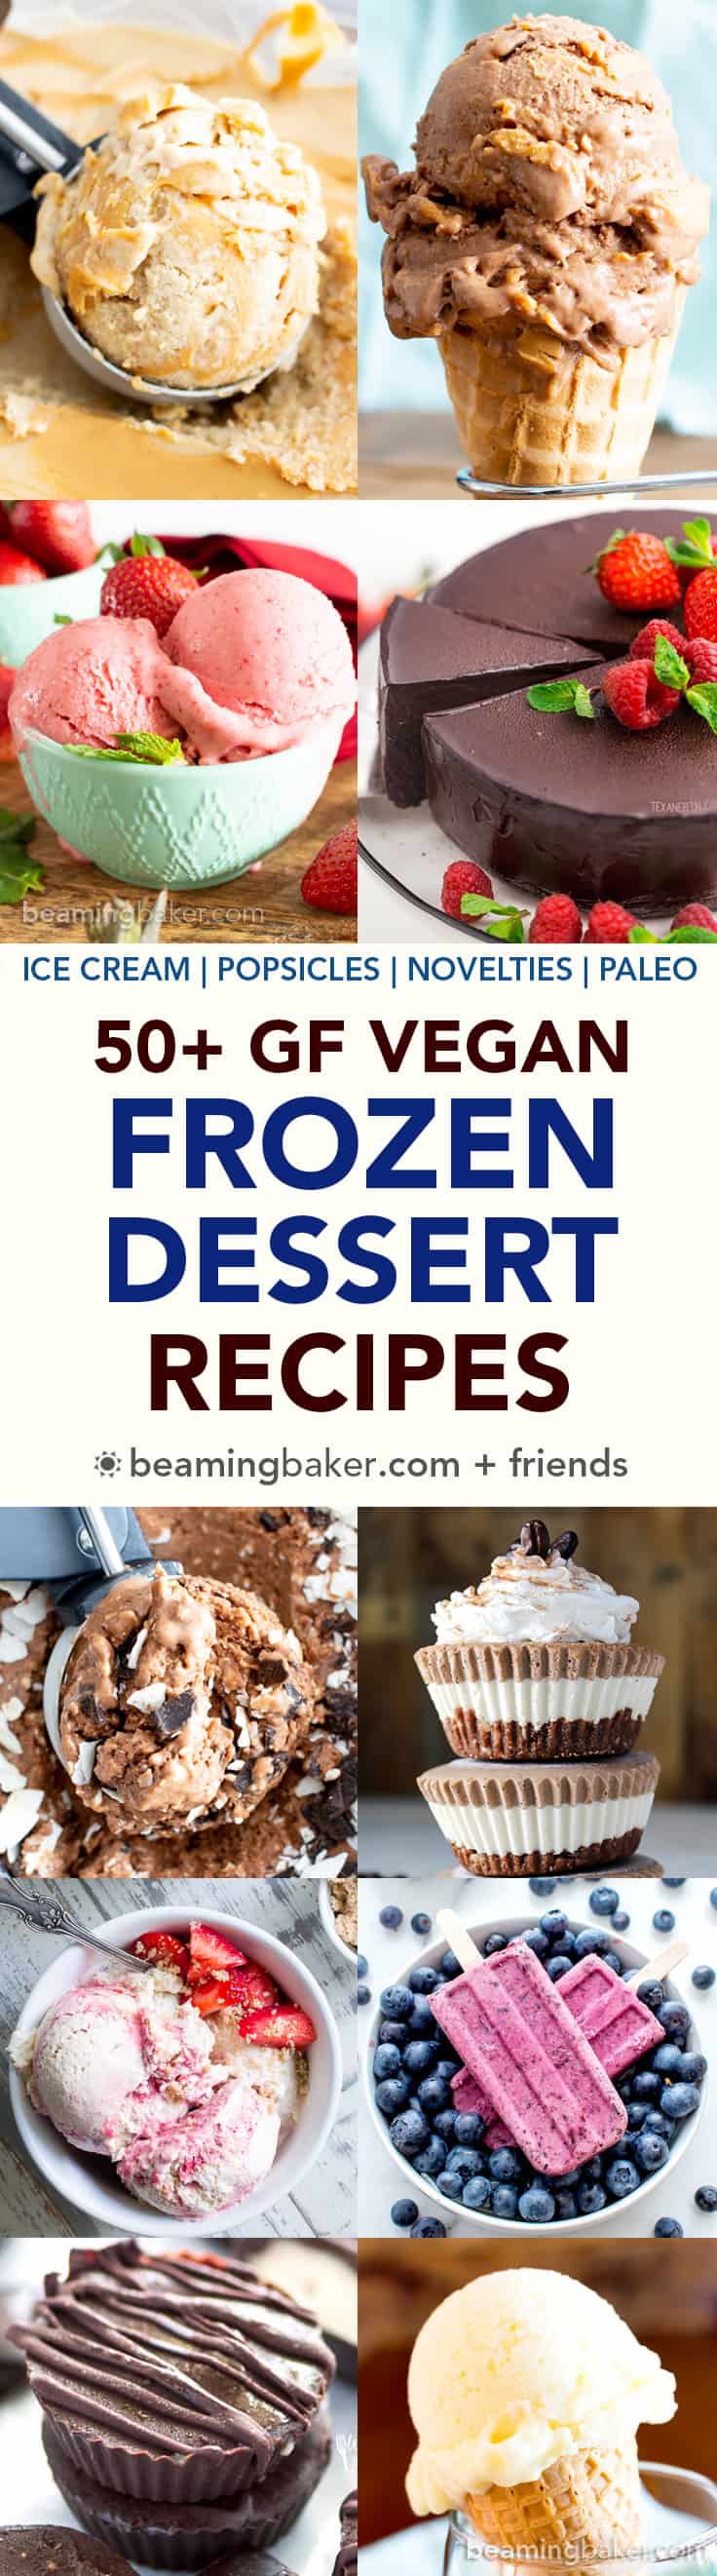 50+ Irresistible Vegan Frozen Dessert Recipes (V, GF): an amazing collection of mouthwatering recipes for the best paleo, gluten-free, vegan frozen desserts, from ice cream and popsicles to milkshakes and more! #Vegan #GlutenFree #DairyFree #RefinedSugarFree #Desserts #IceCream #Popsicles | Recipes on BeamingBaker.com